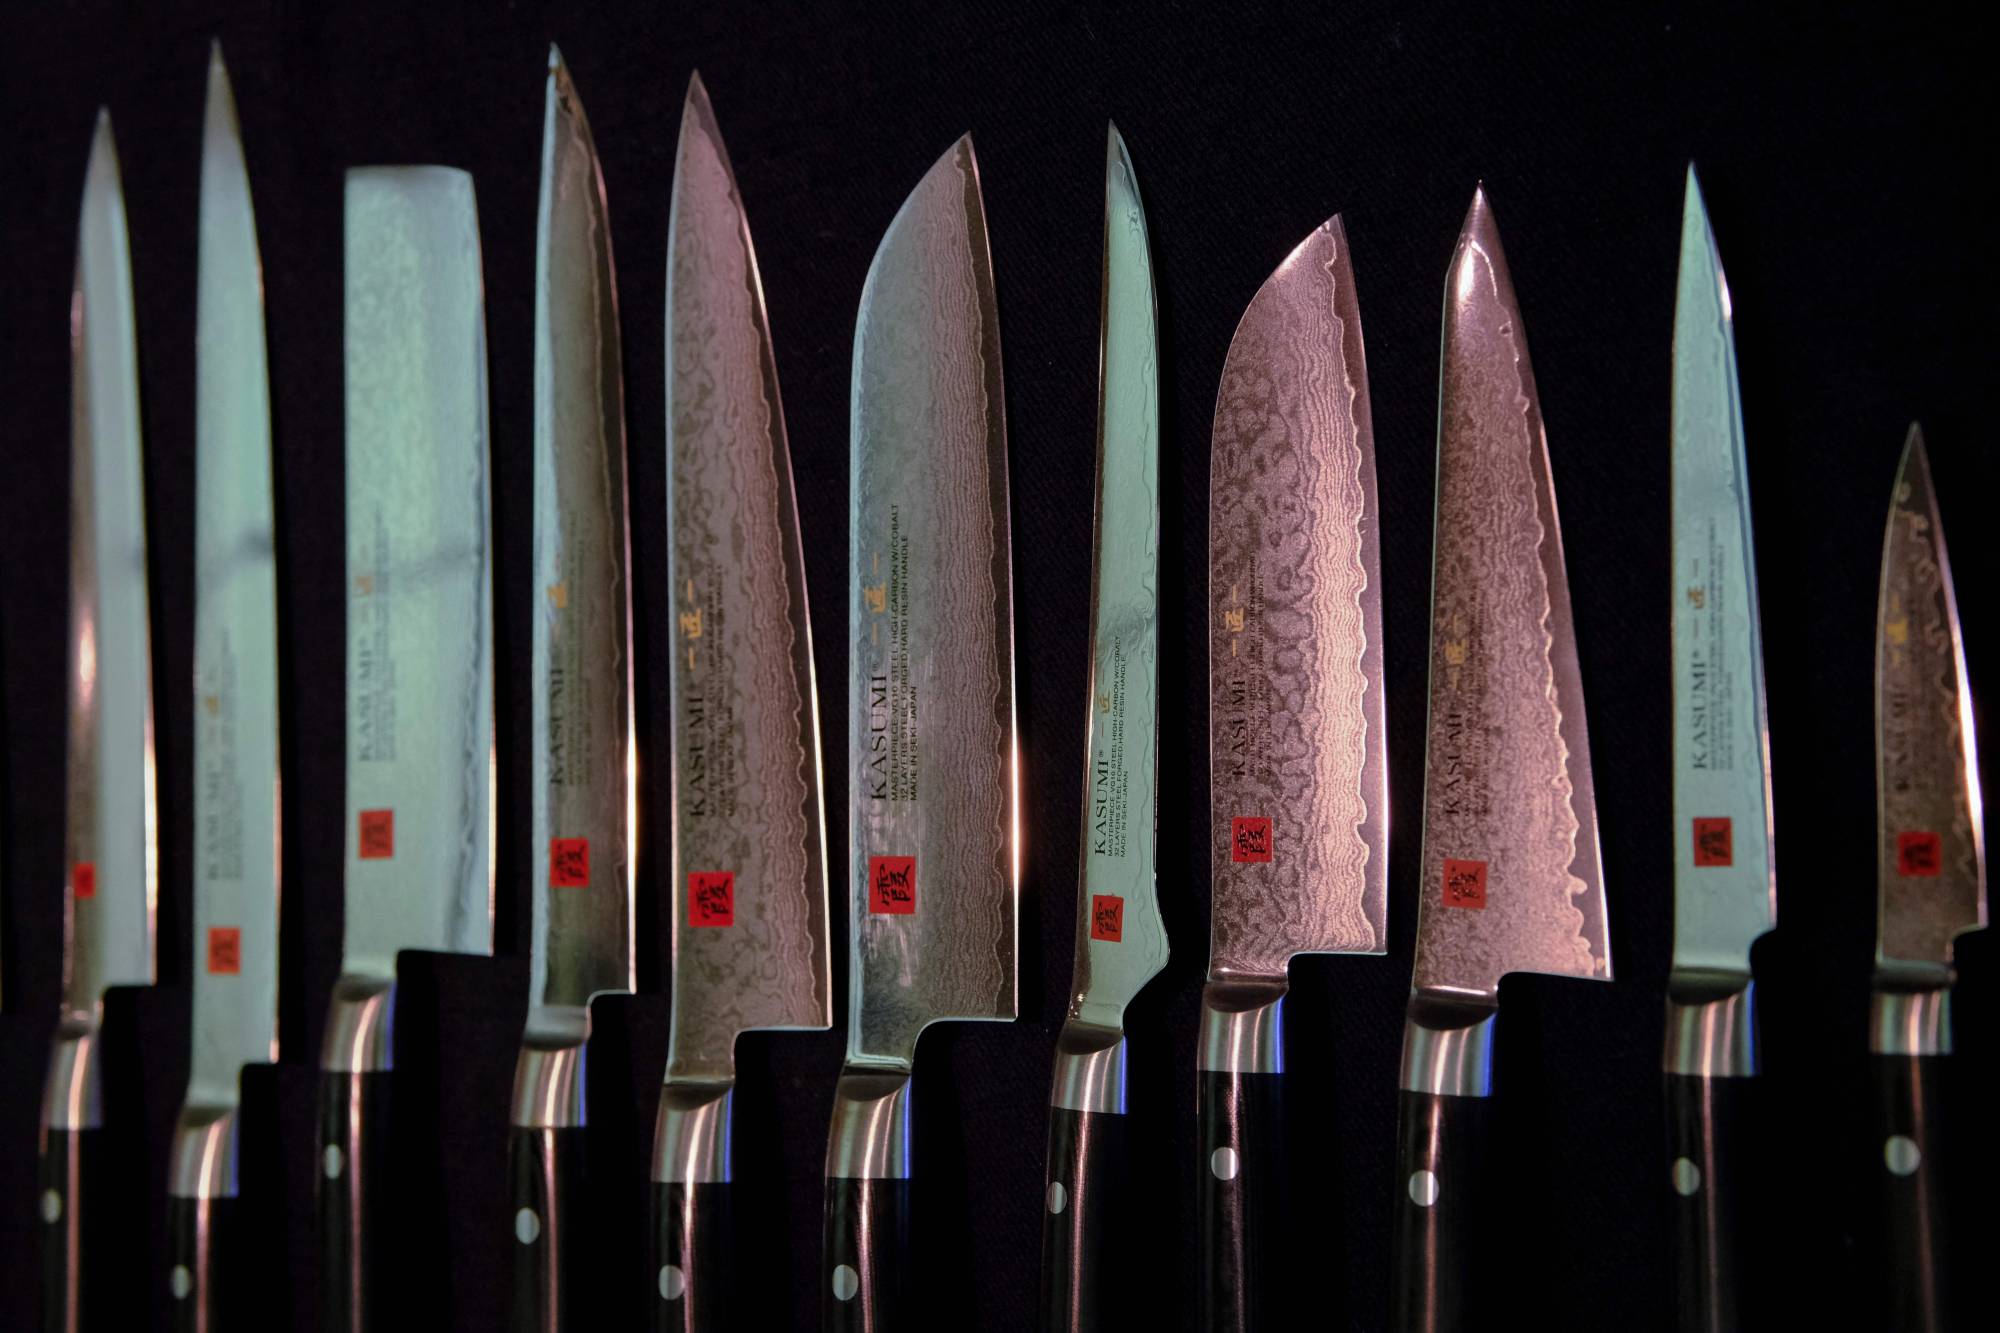 Can't keep up': Pandemic cooking boom sharpens knife sales in